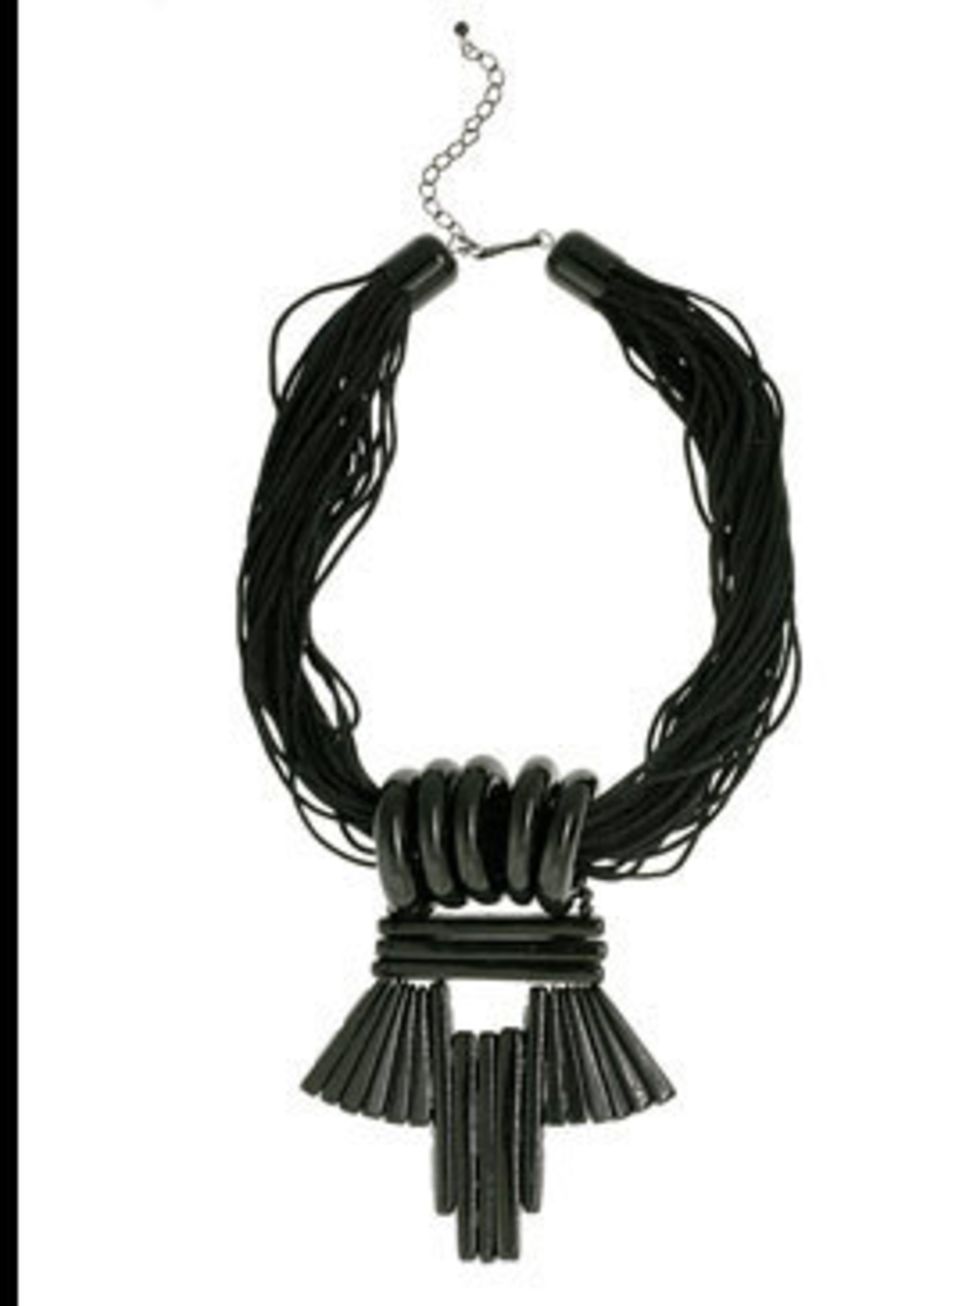 <p> Necklace, £145 by Tuleste at <a href="http://www.kabiri.co.uk/jewellery/necklaces/lucite_cord_necklace">Kabiri</a></p>